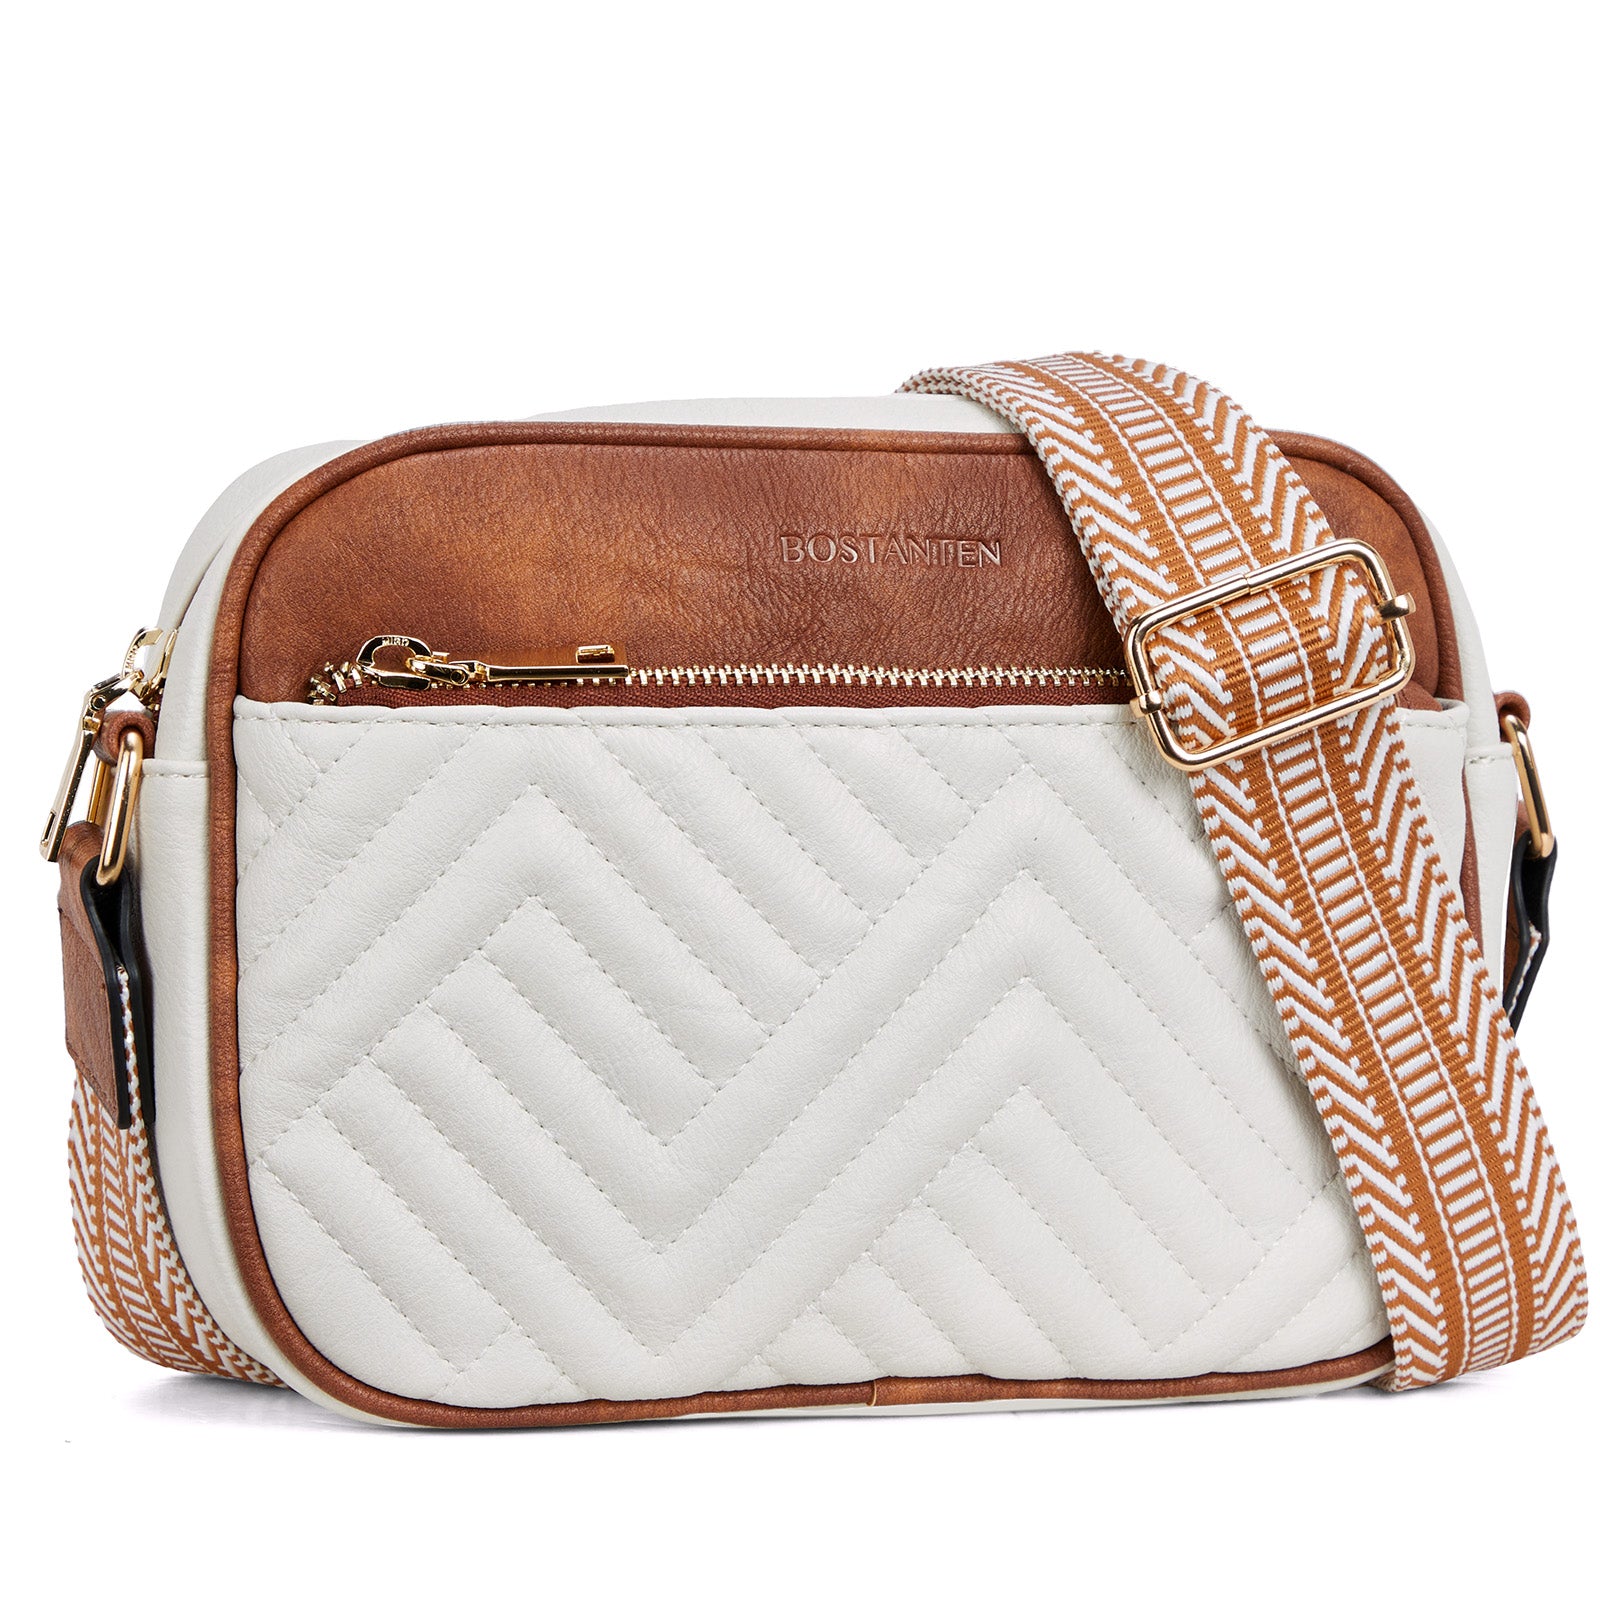 Vegan Leather Crossbody Bags for Women - Shop Now for Sustainable